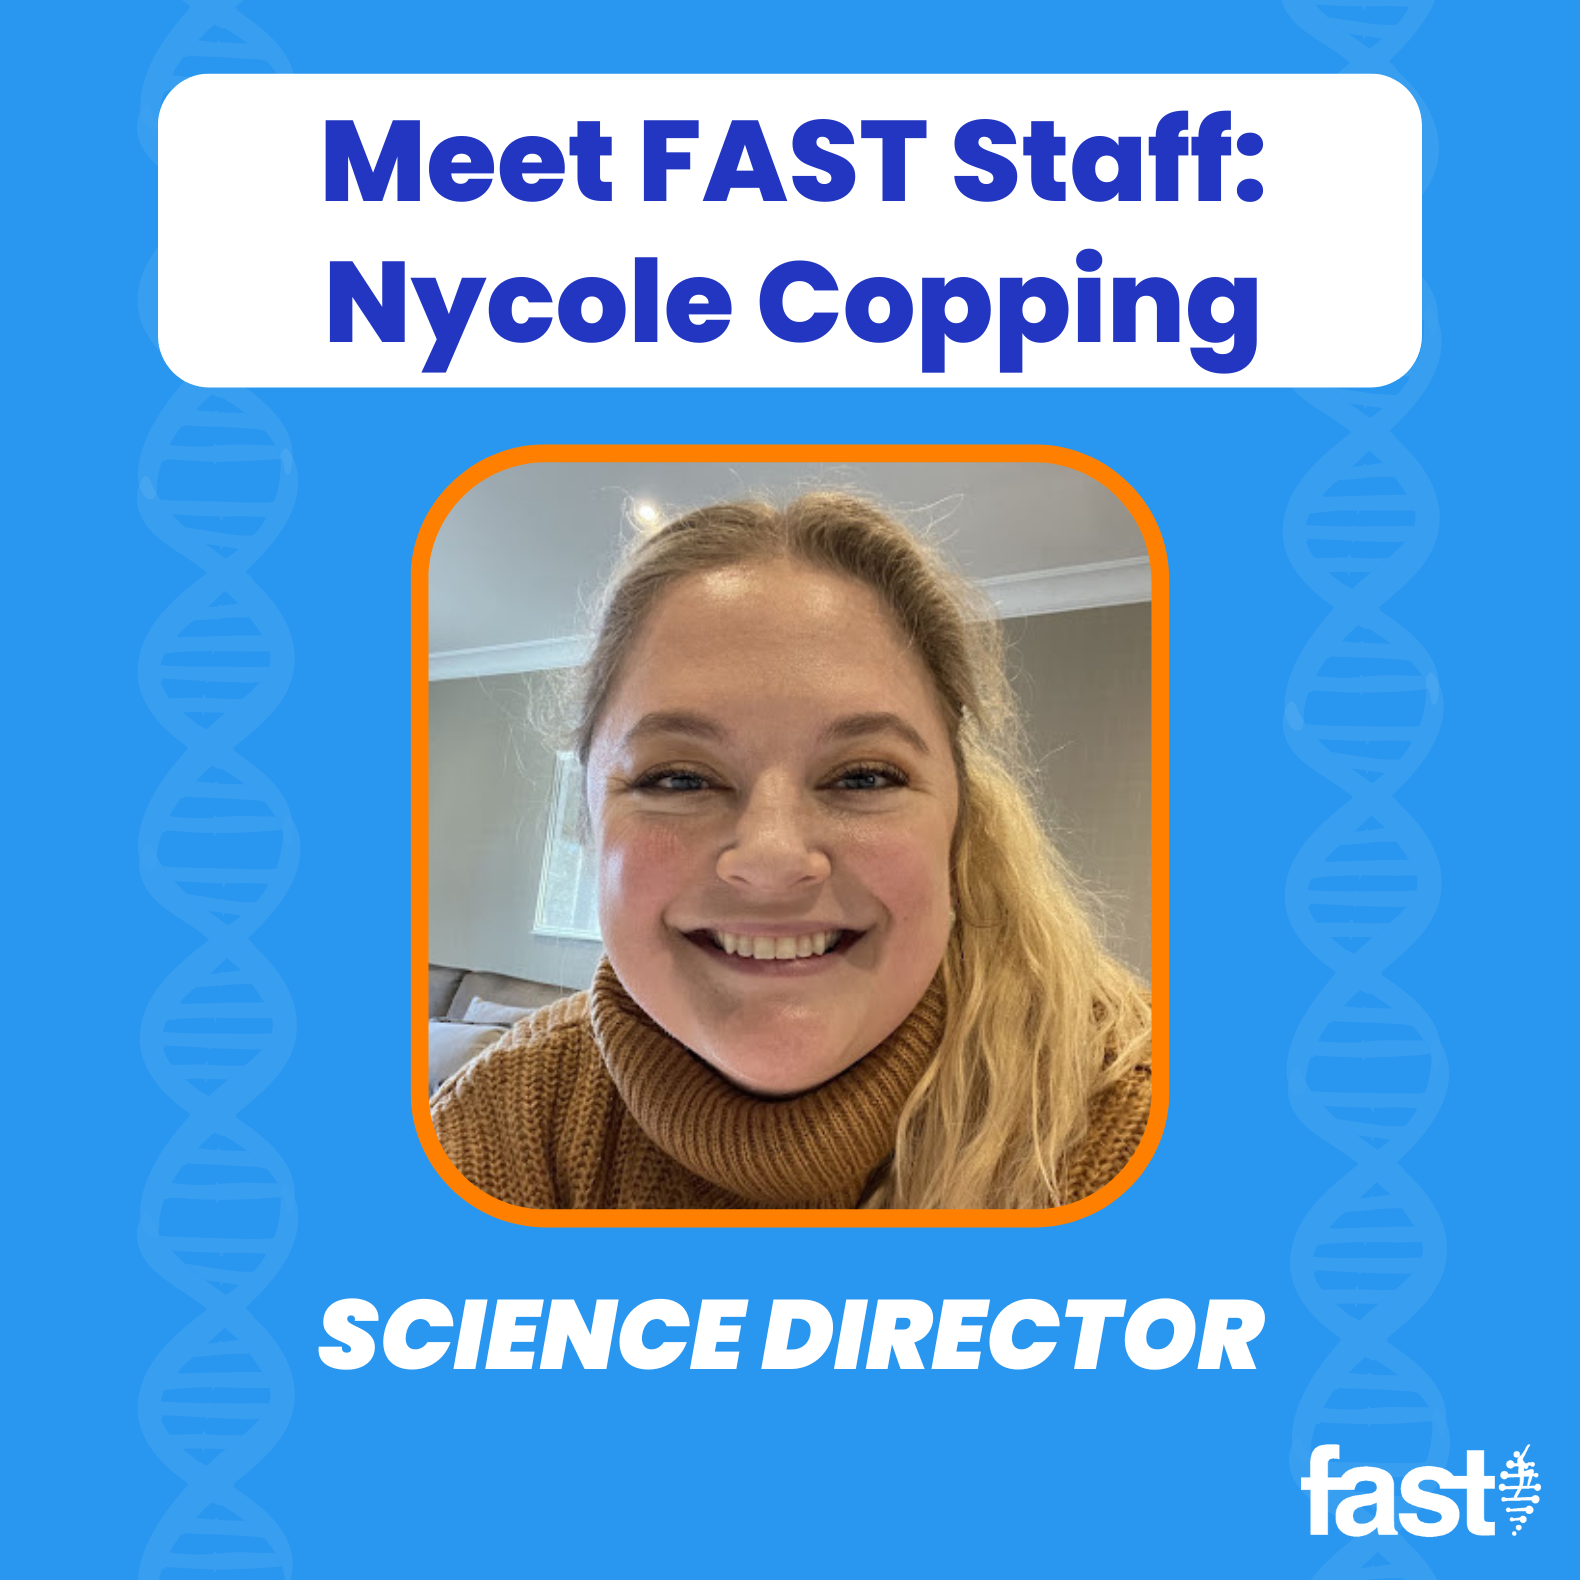 Meet FAST Staff: Nycole Copping, Science Director - with a photo of Nycole